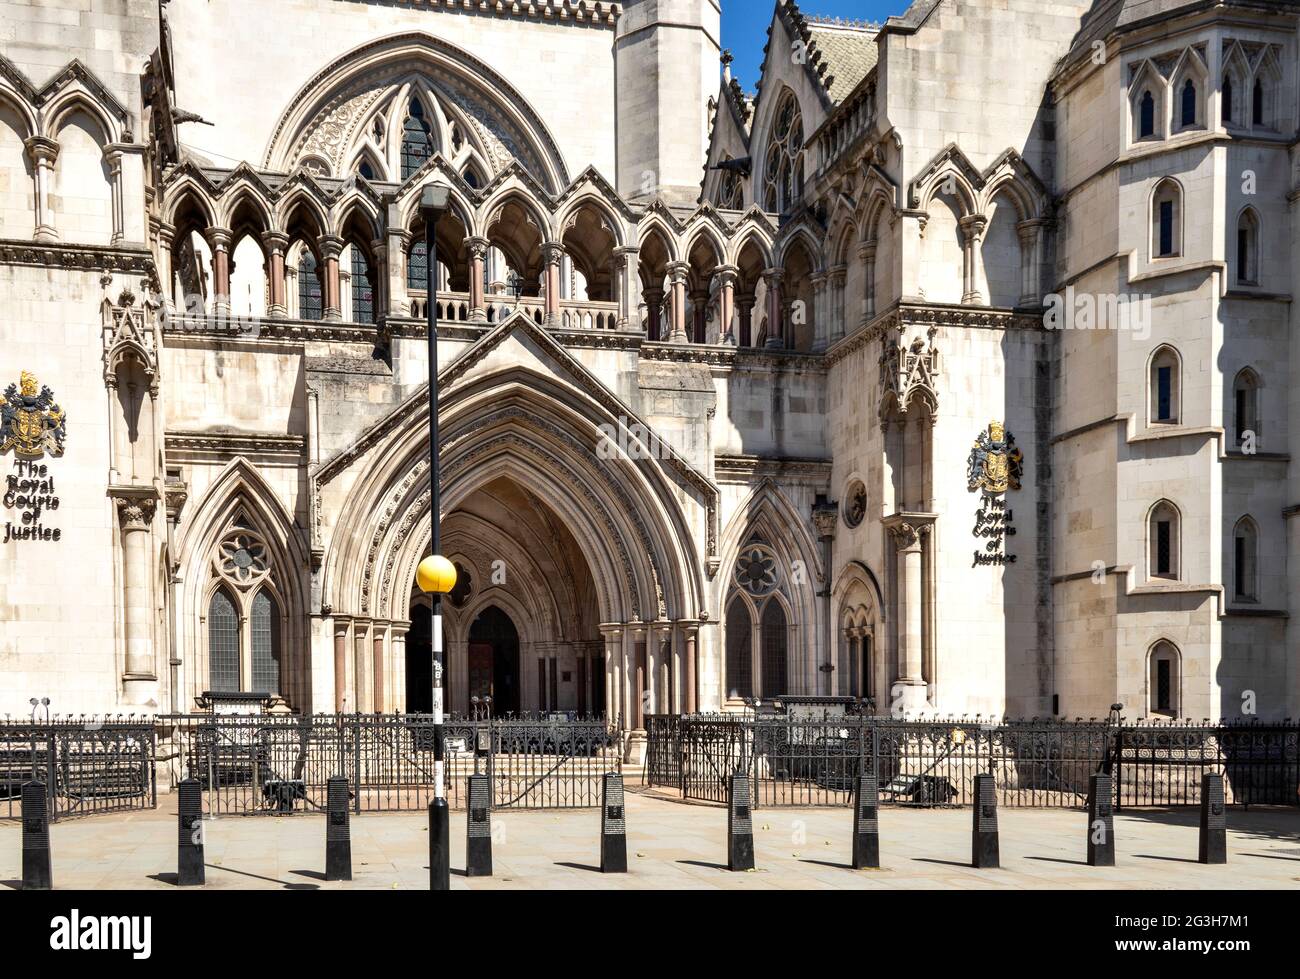 LONDON ENGLAND ROYAL COURTS OF JUSTICE OR LAW COURTS THE STRAND MAIN ENTRANCE Stock Photo